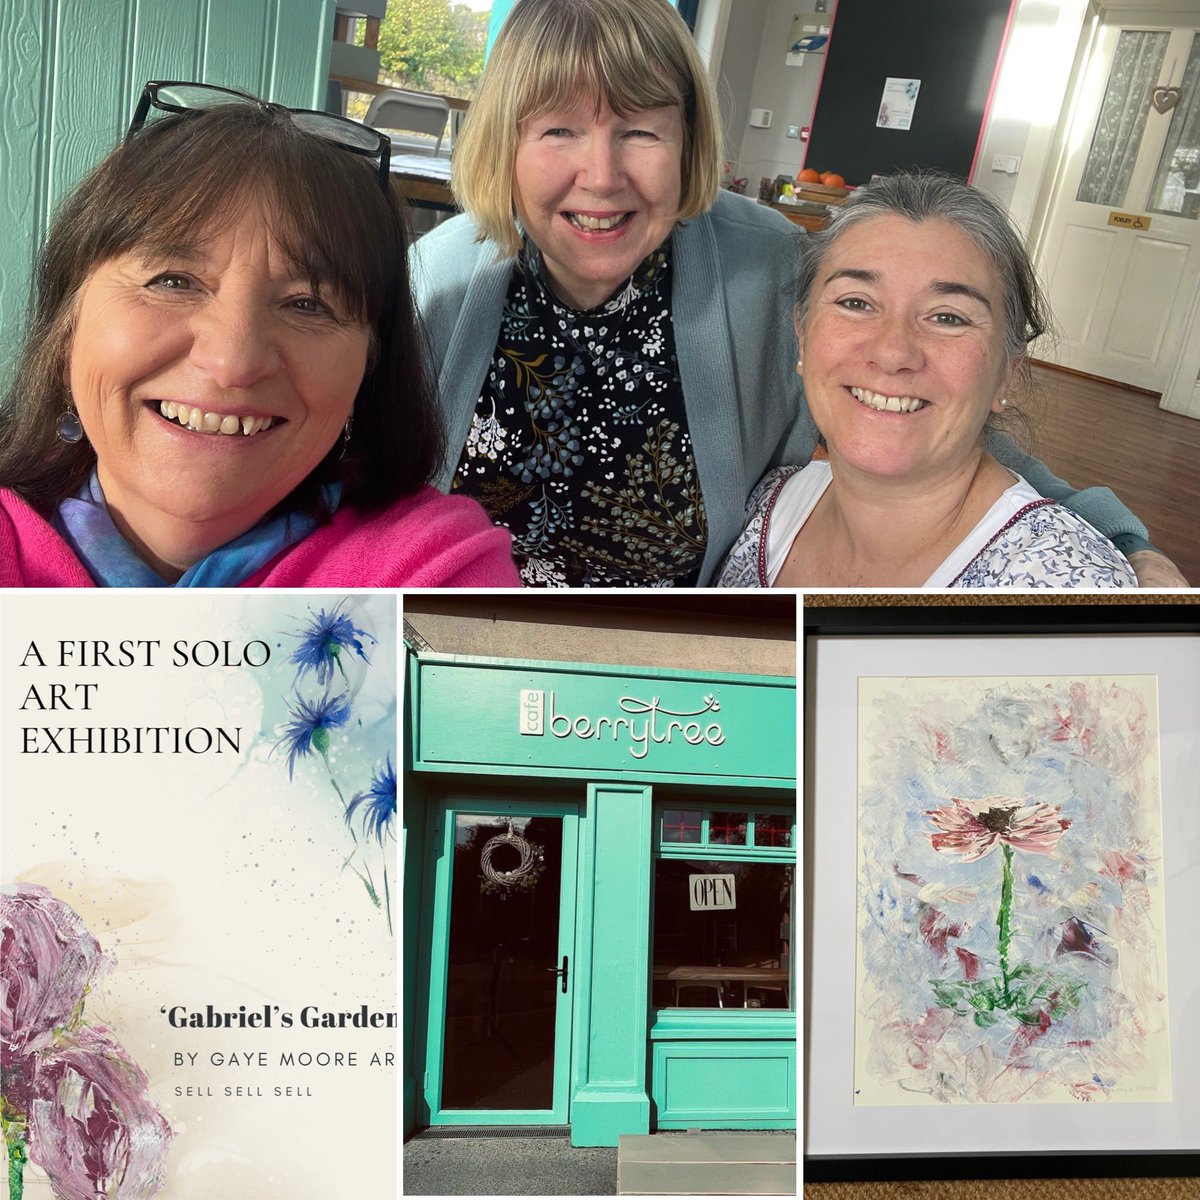 A huge thank you to everyone for support for my first solo art exhibition 🎨👩‍🎨🖼
To Cliona Coyne at BerryTree cafe for hosting, to @MaXiMiLliSt for poster design & helping me hang my art, to @PatriciaAnneMo2 for radio interview & to everyone for words of encouragement #gratefull